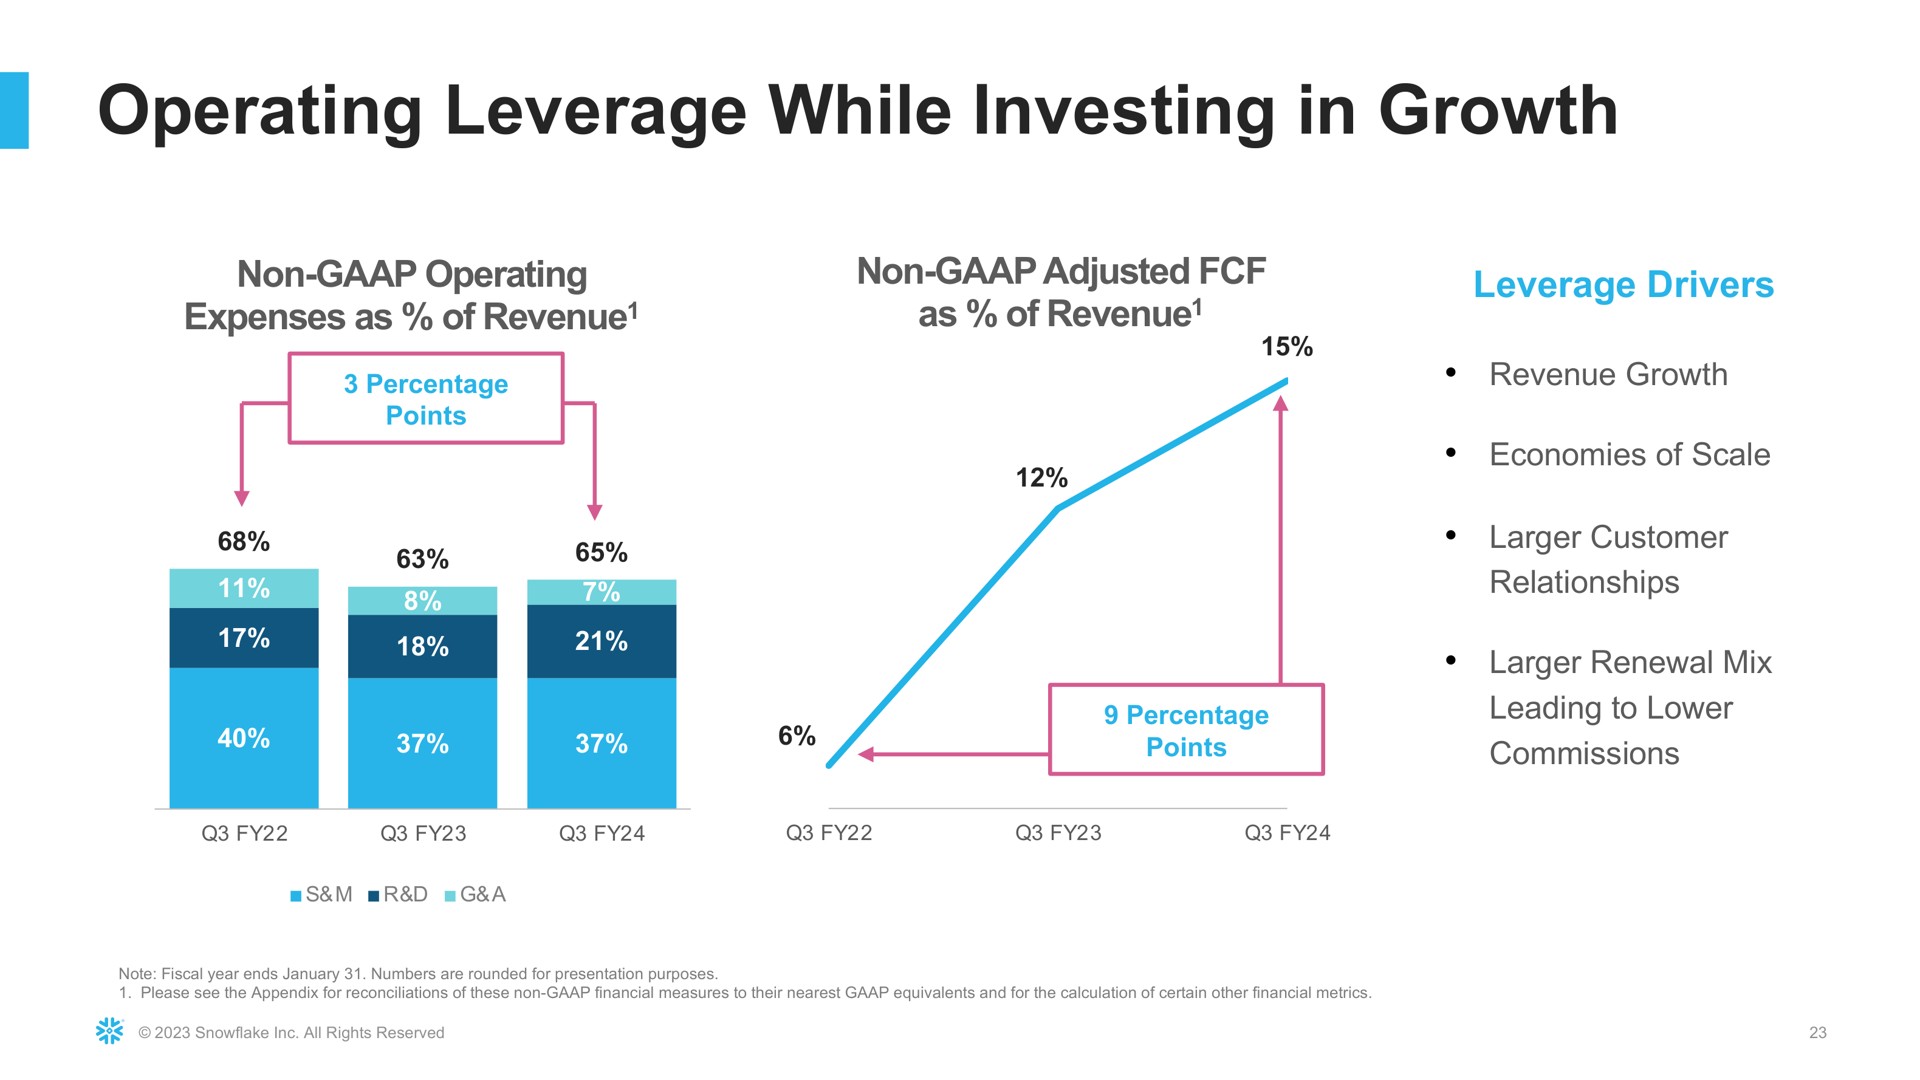 operating leverage while investing in growth | Snowflake